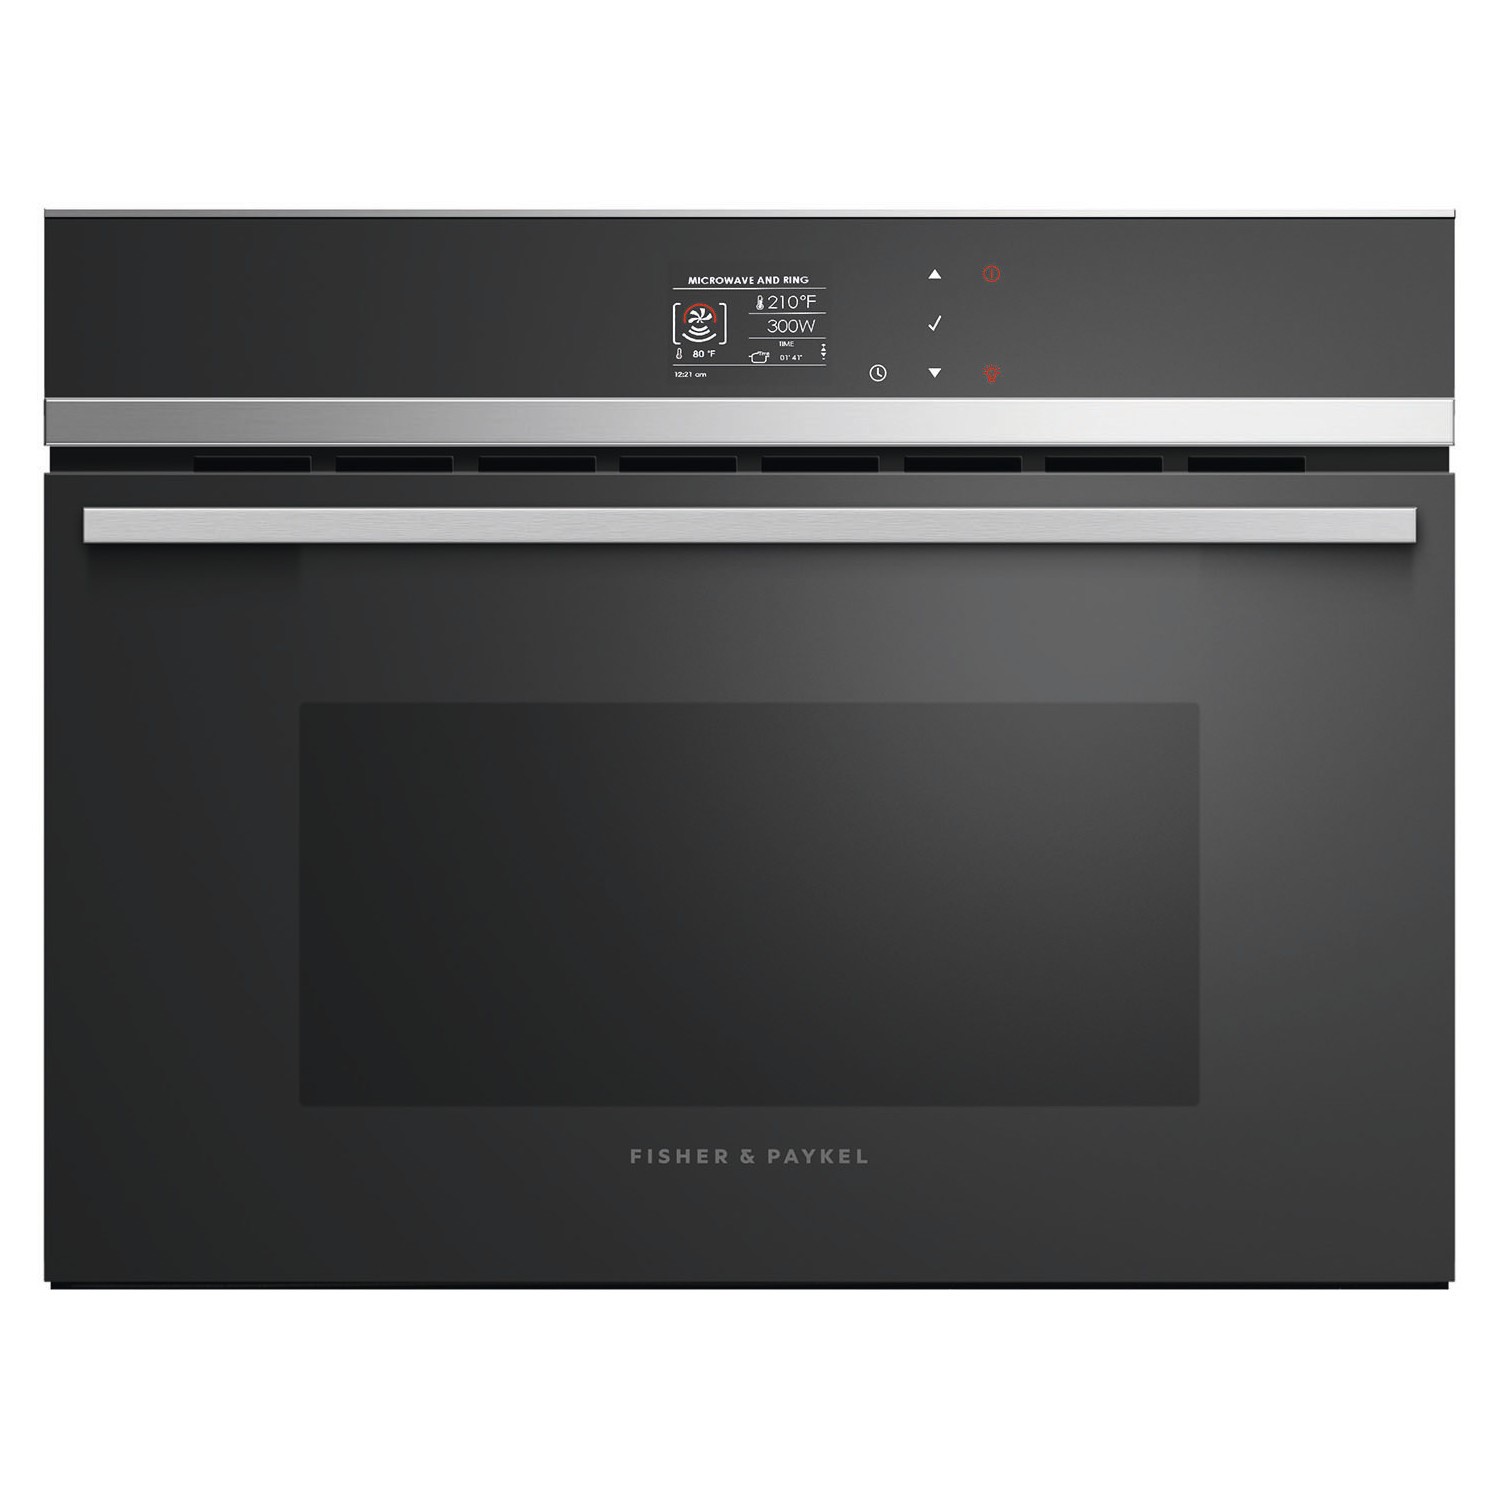 Fisher & Paykel Series 9 Built-in Microwave Oven & Grill - Black Glass & Stainless Steel